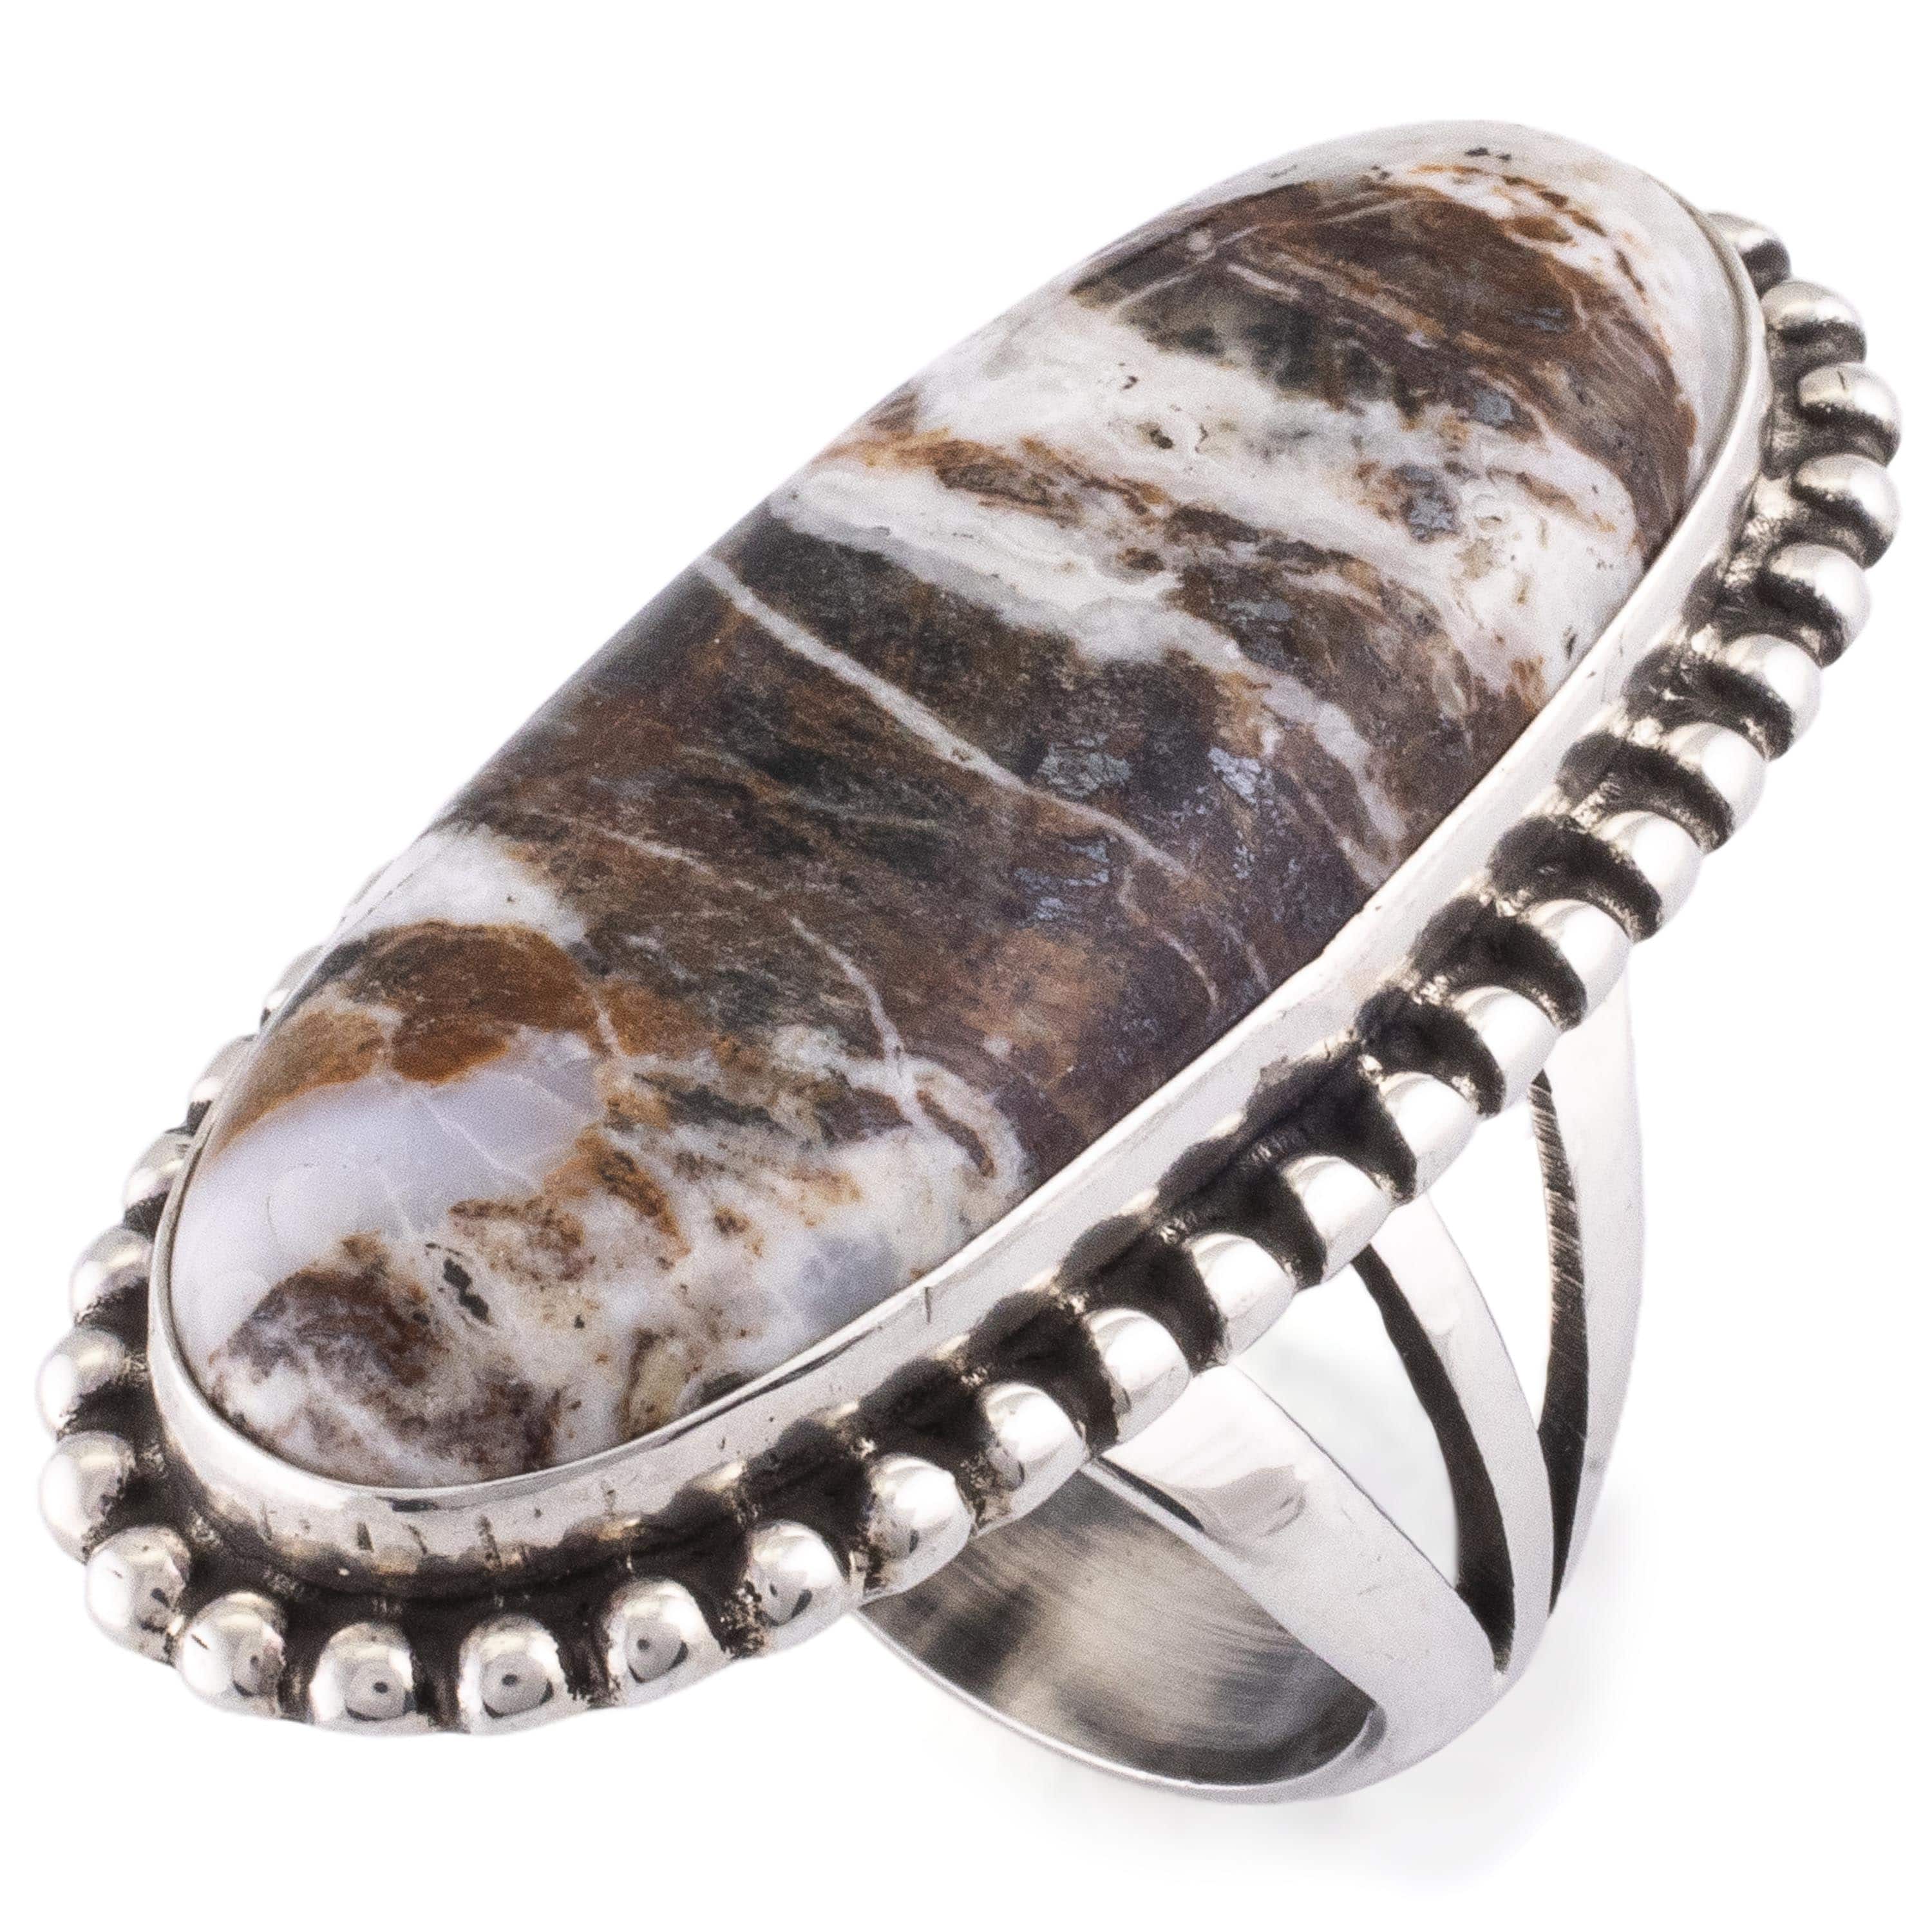 Kalifano Native American Jewelry 8.5 Eddie Secatero Navajo White Buffalo Turquoise USA Native American Made 925 Sterling Silver Ring NAR900.023.85